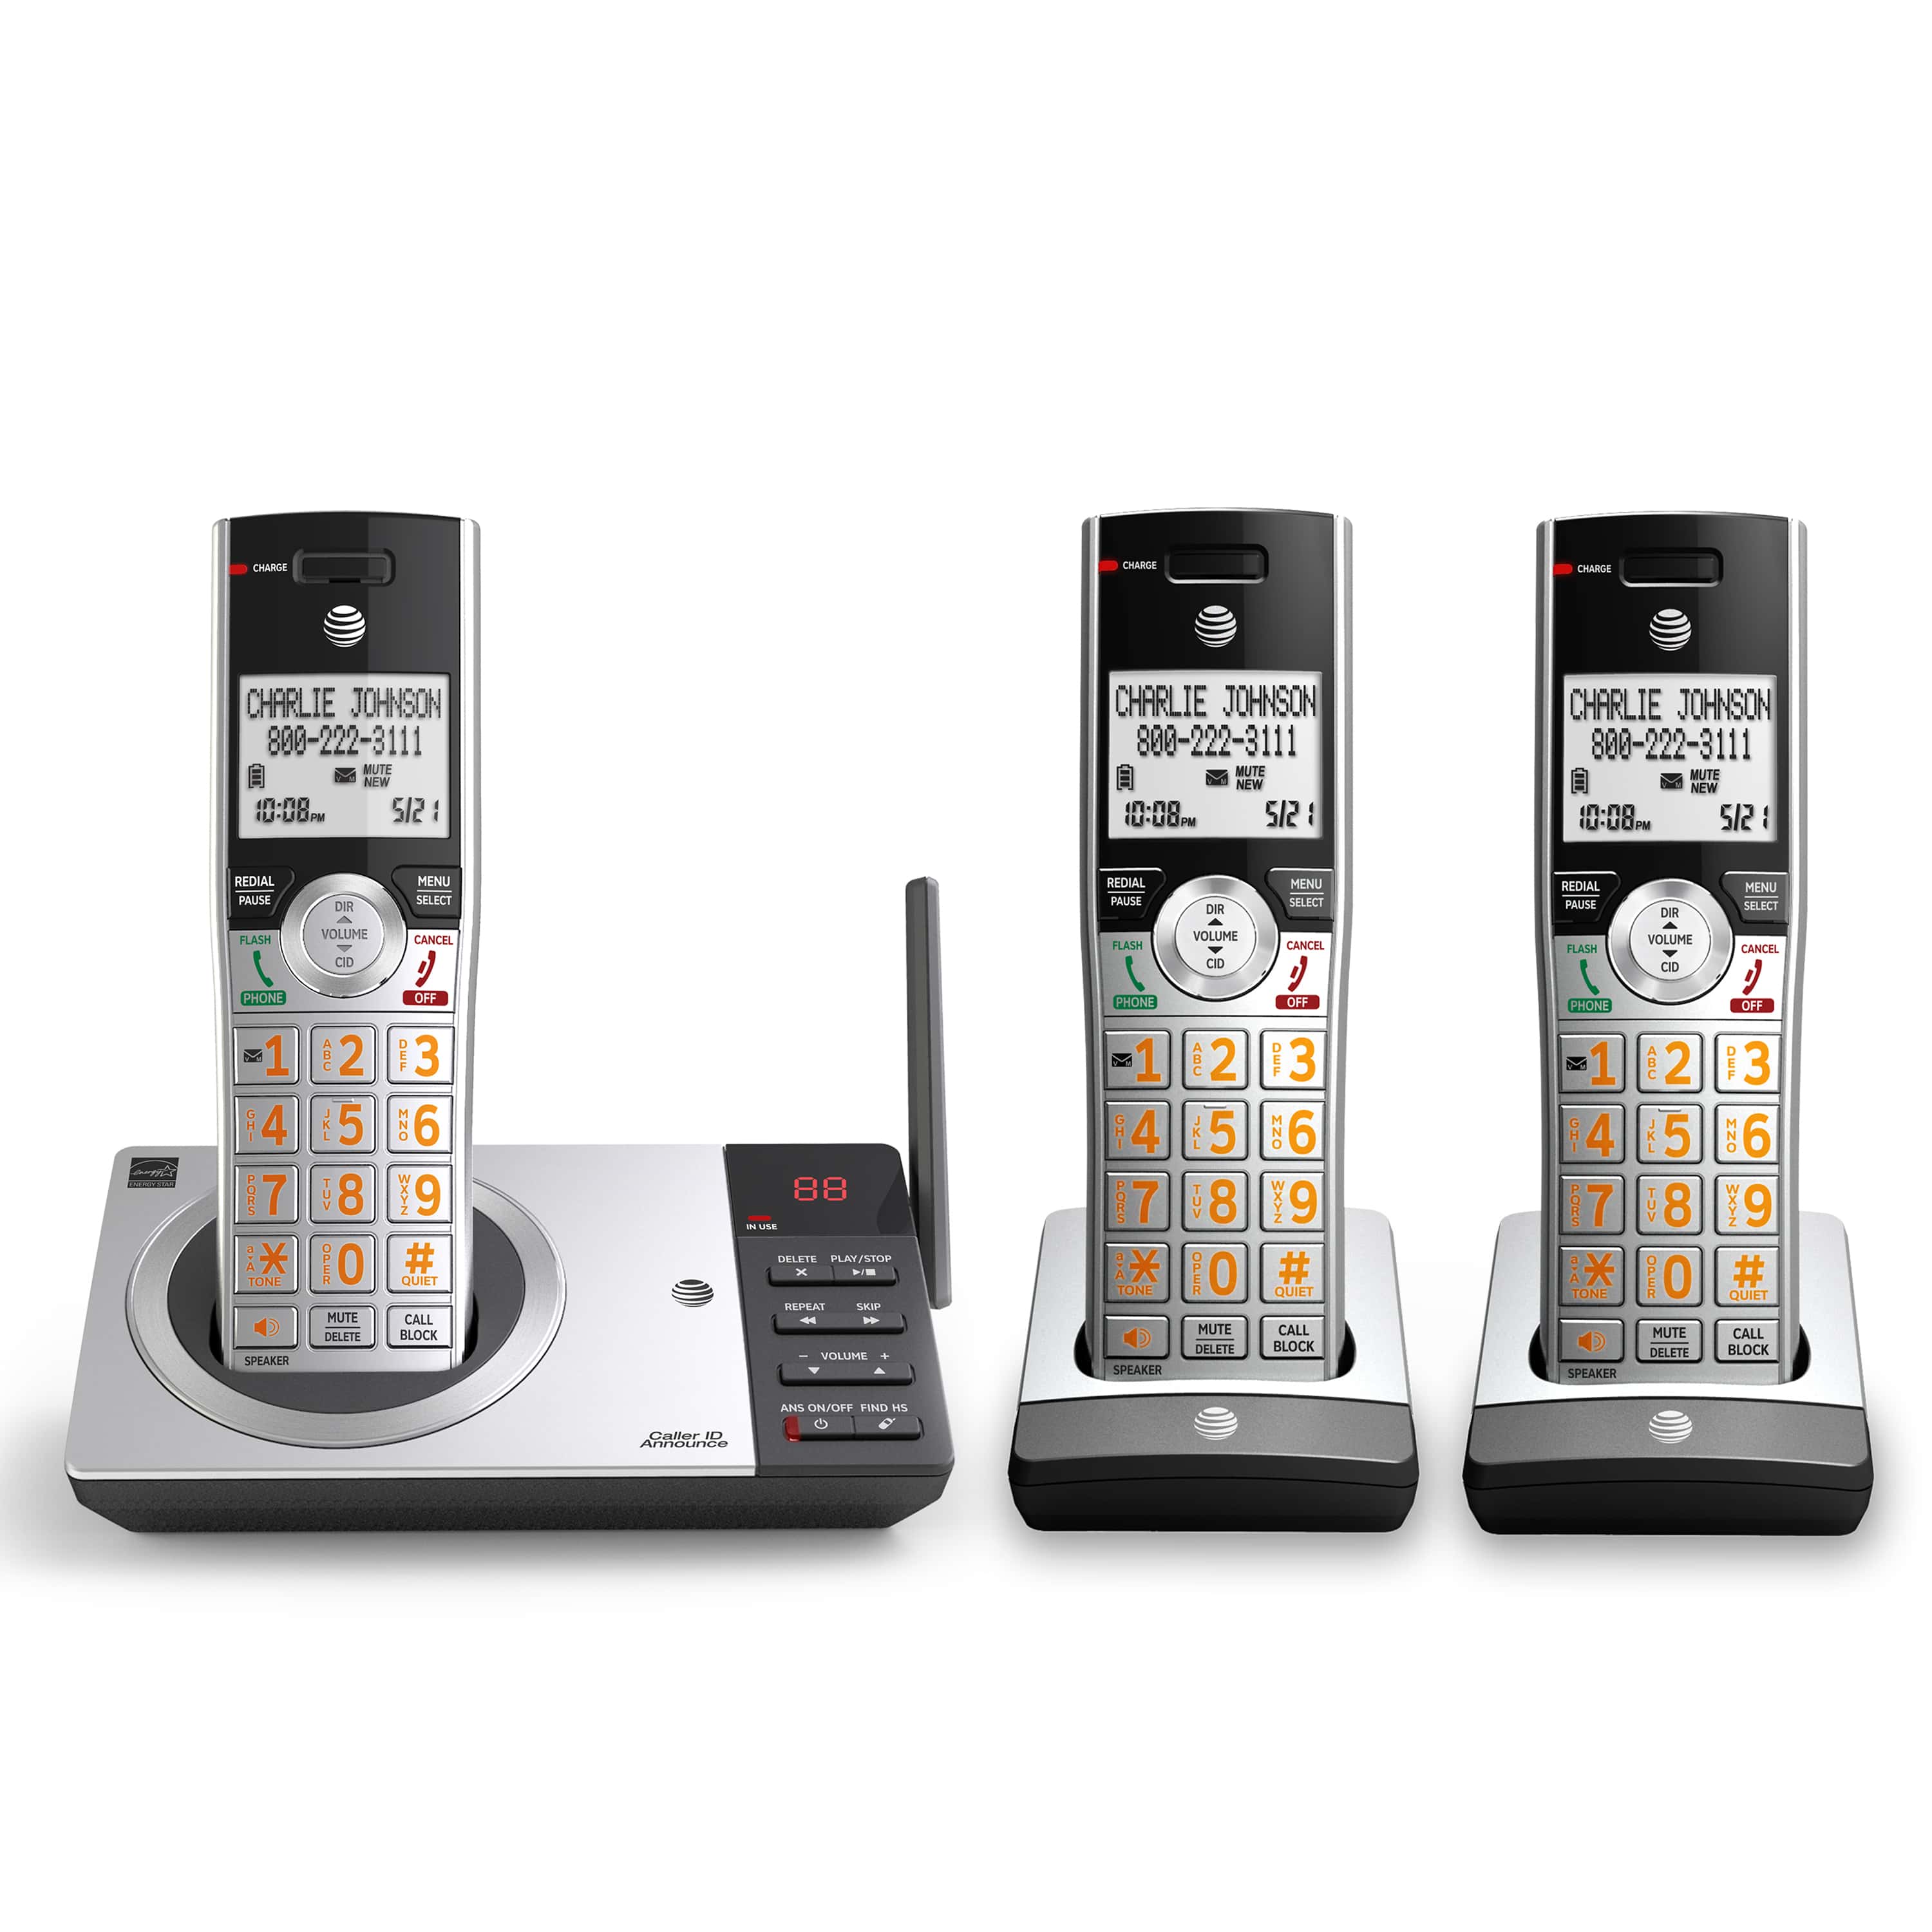 3 handset cordless answering system with smart call blocker - view 1